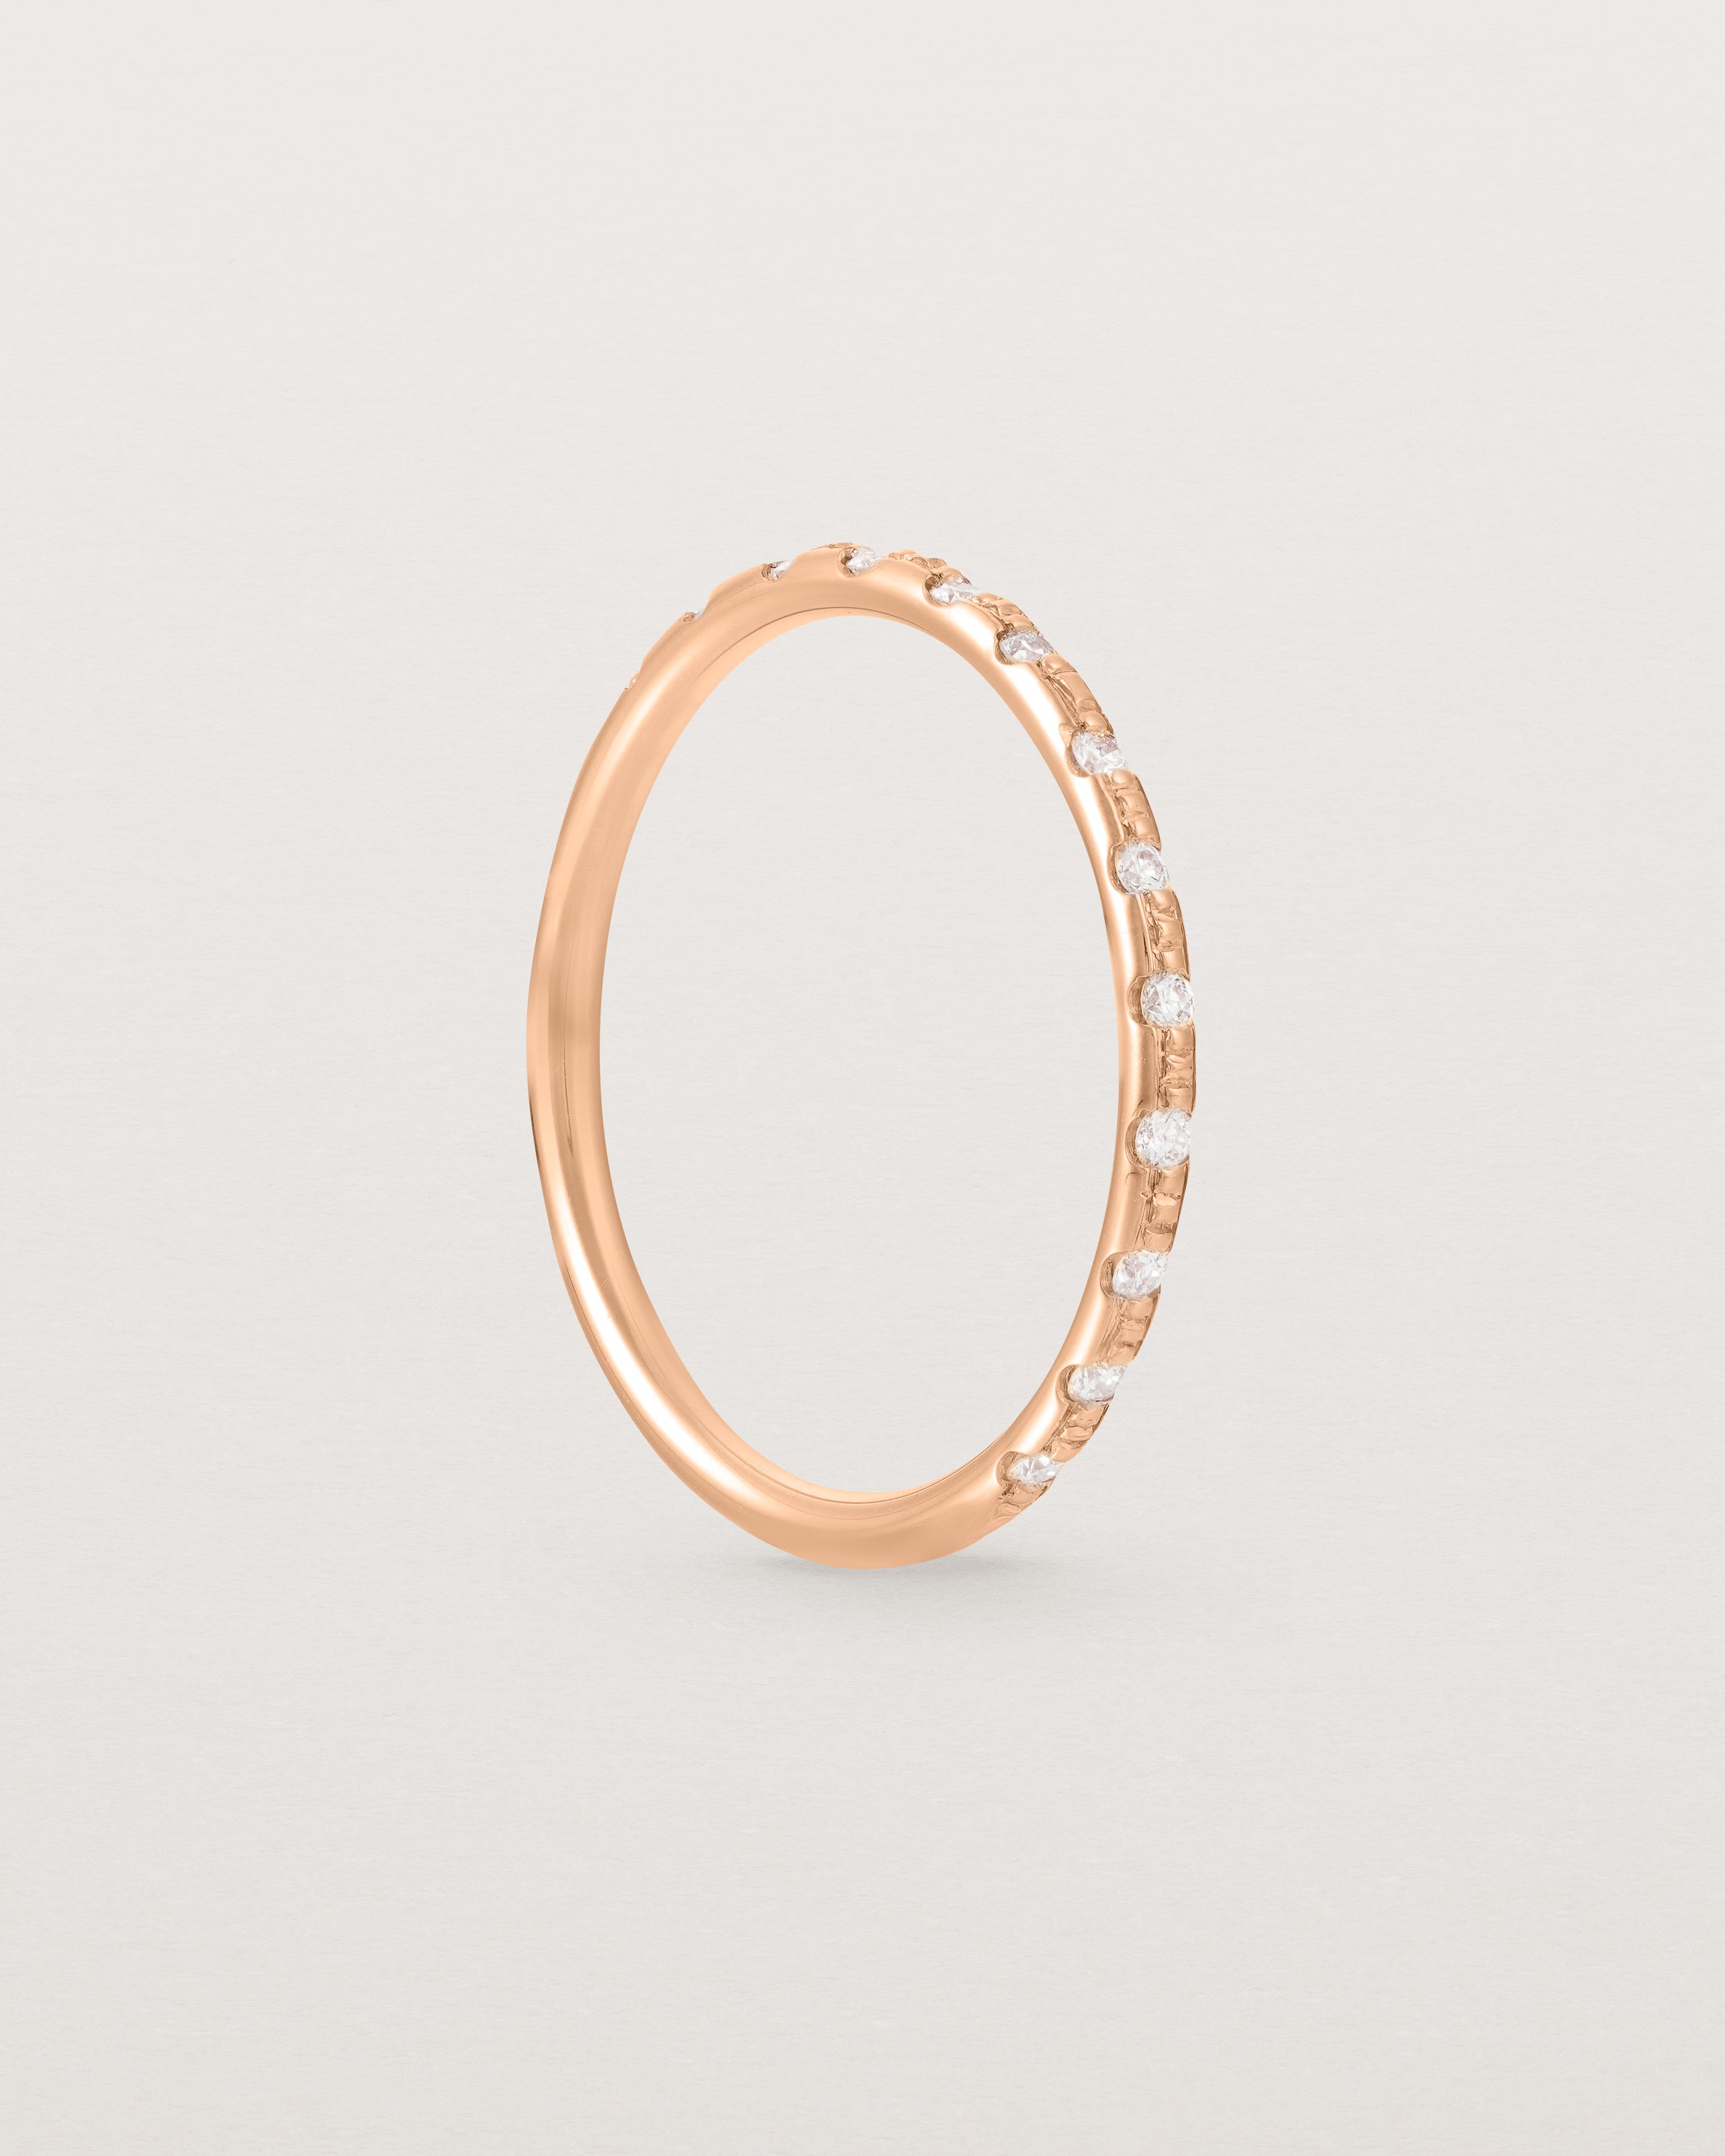 Standing View of Cascade Round Profile Wedding Ring | Diamonds | Rose Gold